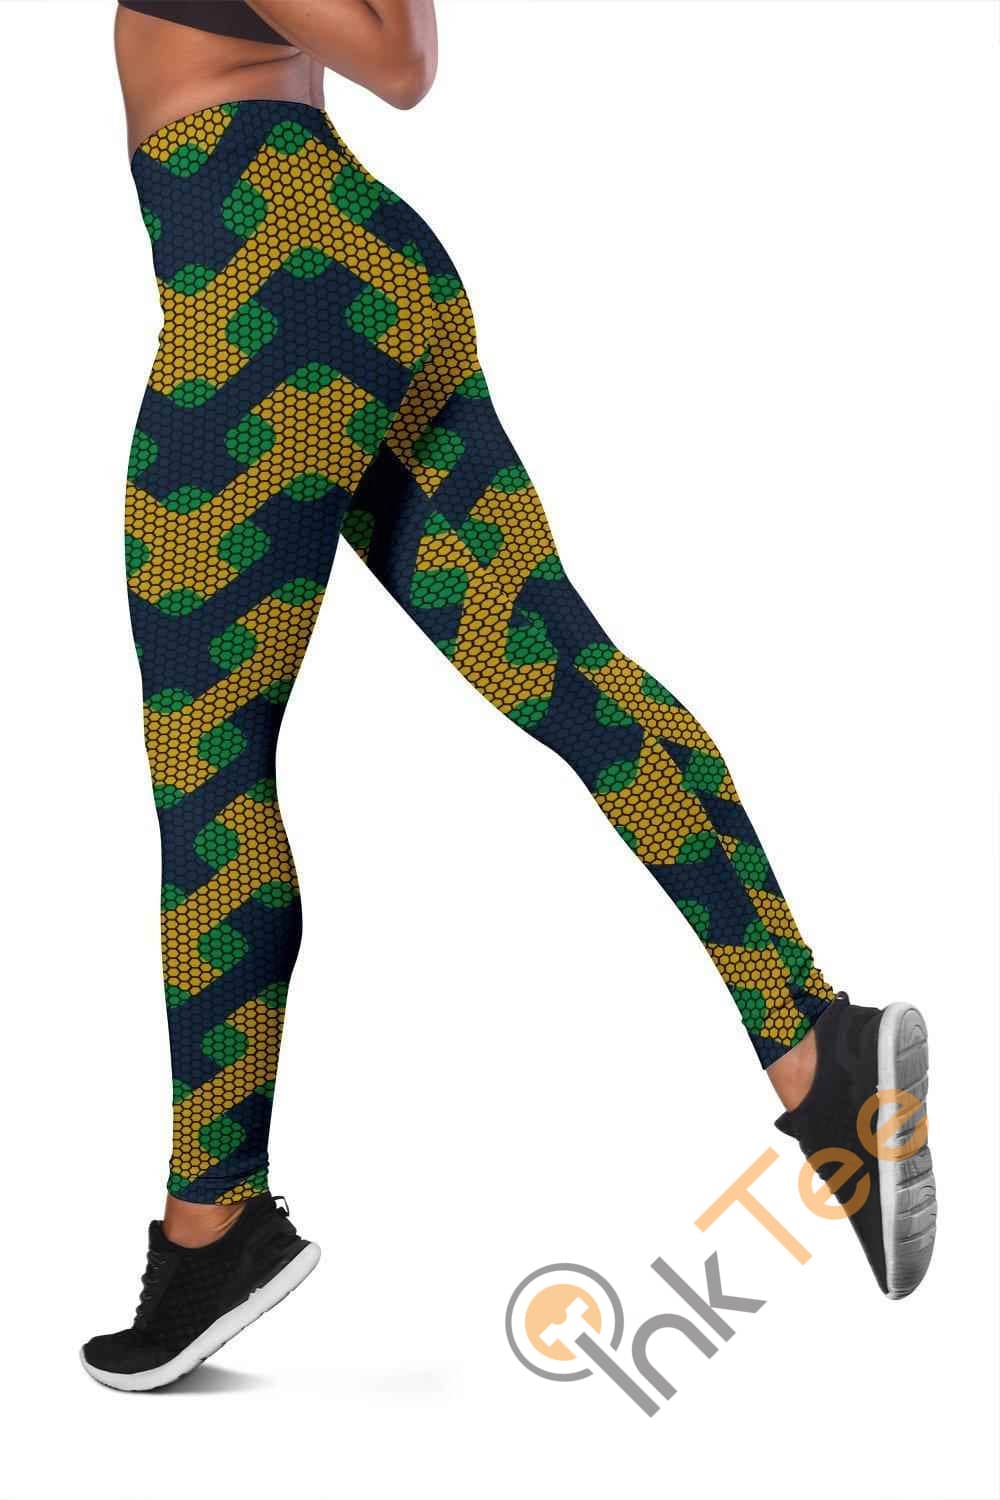 Inktee Store - Notre Dame Fighting Irish Inspired Liberty Green 3D All Over Print For Yoga Fitness Fashion Women'S Leggings Image